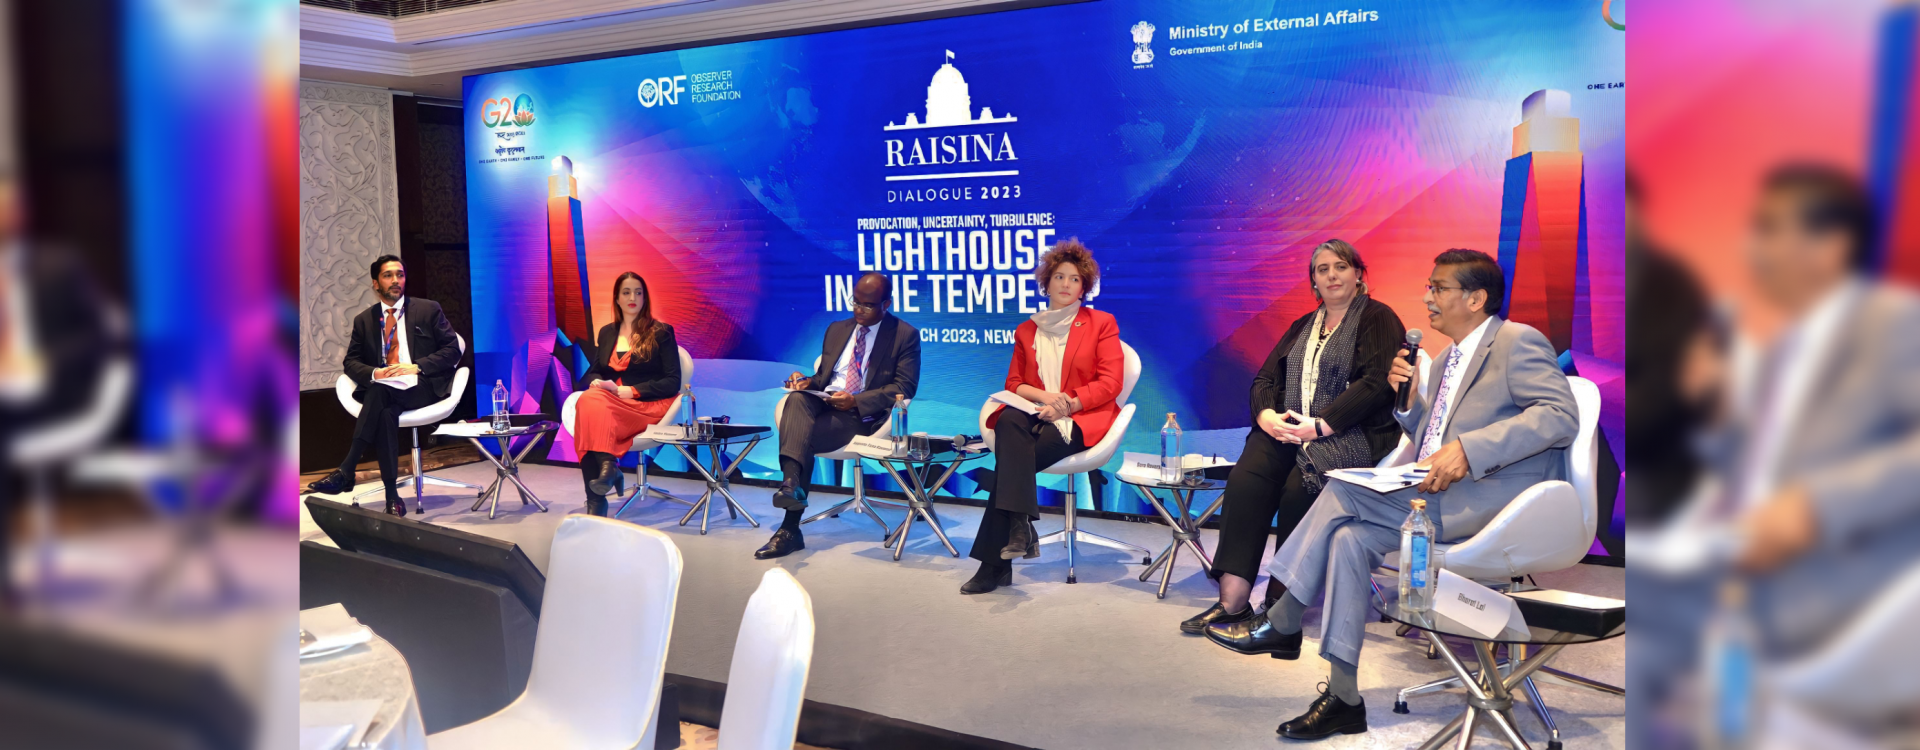 Shri Bharat Lal, DG, moderated a session on India Lighthouse - Piped Water to all at Raisina Dialogue 2023